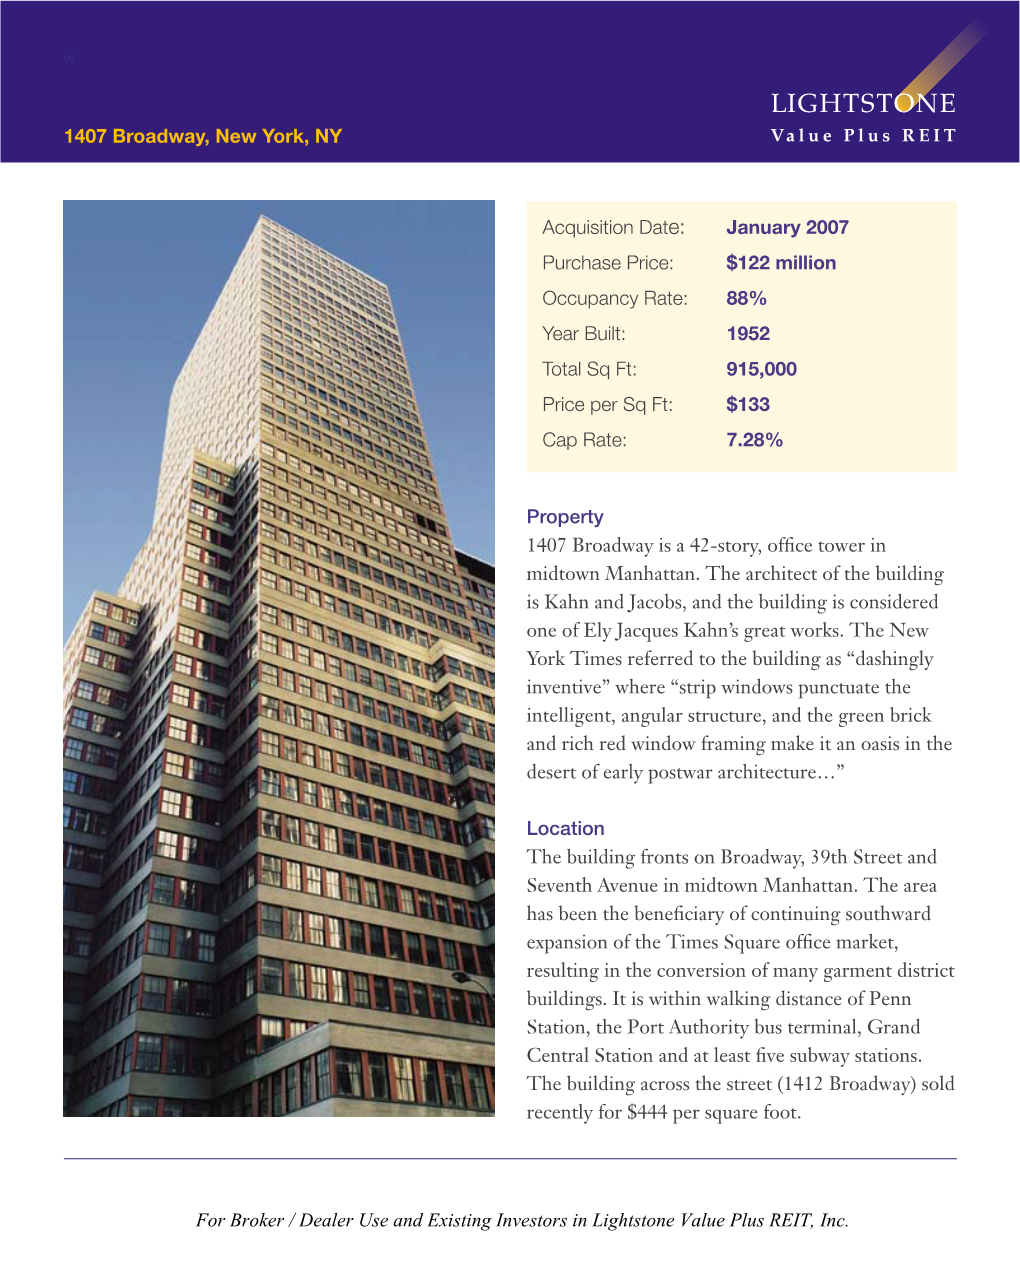 Property 1407 Broadway Is a 42-Story, Office Tower in Midtown Manhattan